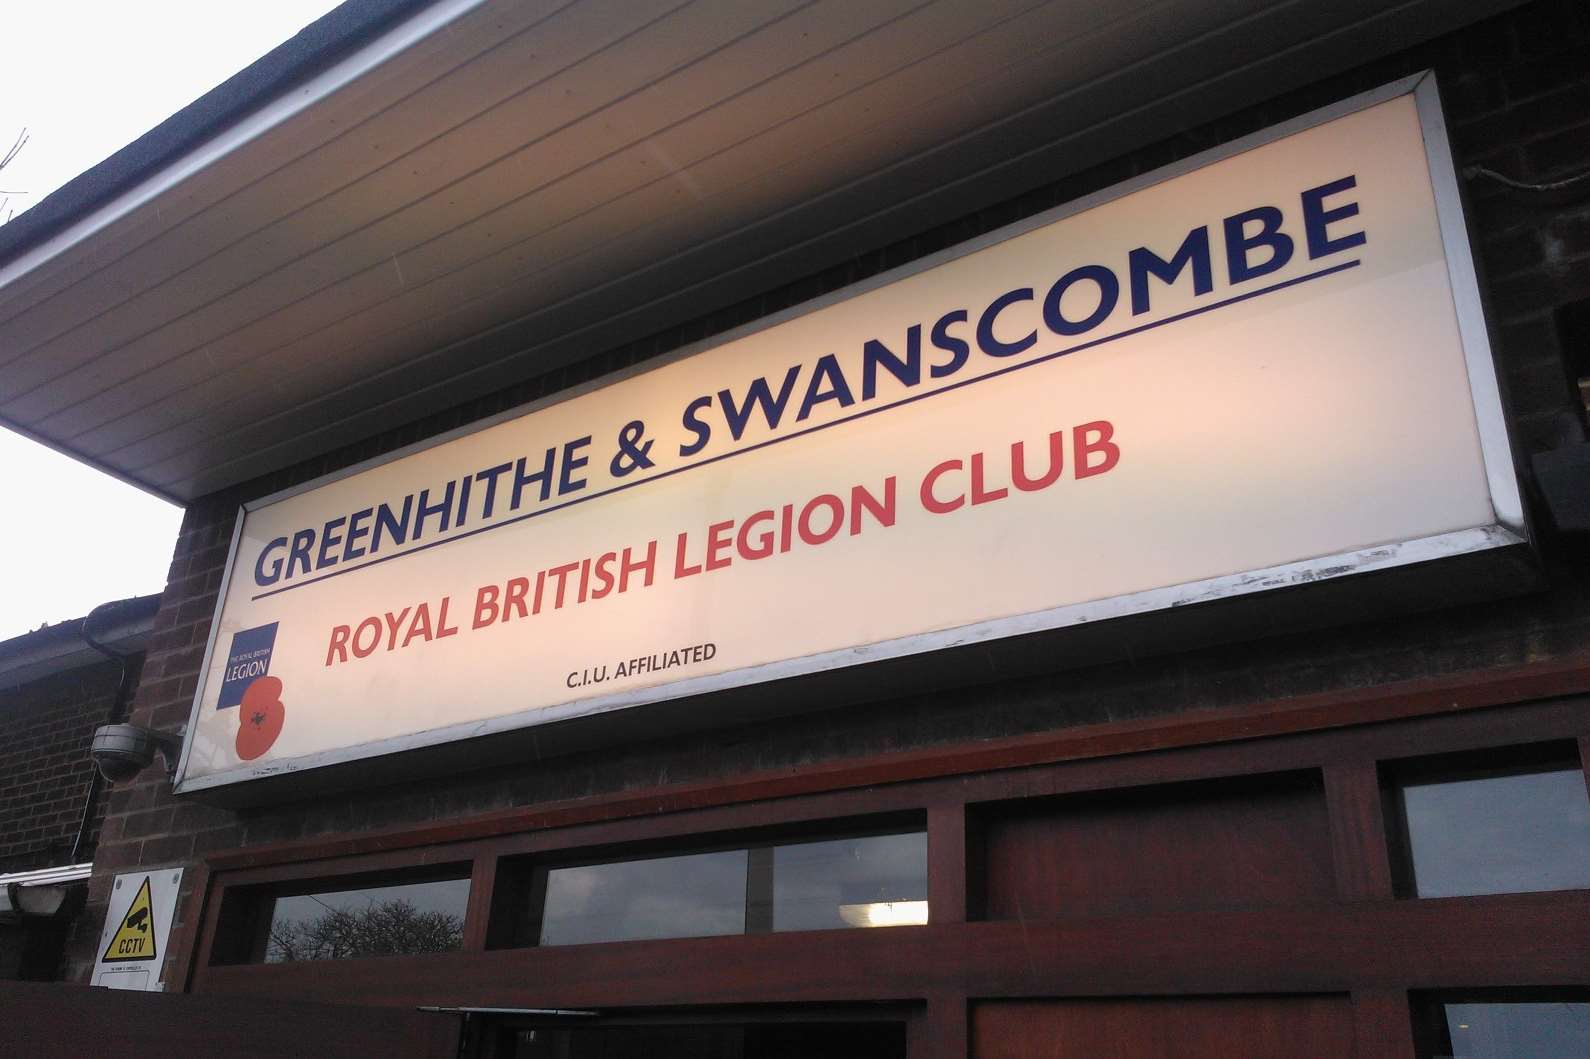 The first of the second round of London Paramount exhibitions was held here, at Greenhithe and Swanscombe Royal British Legion Club